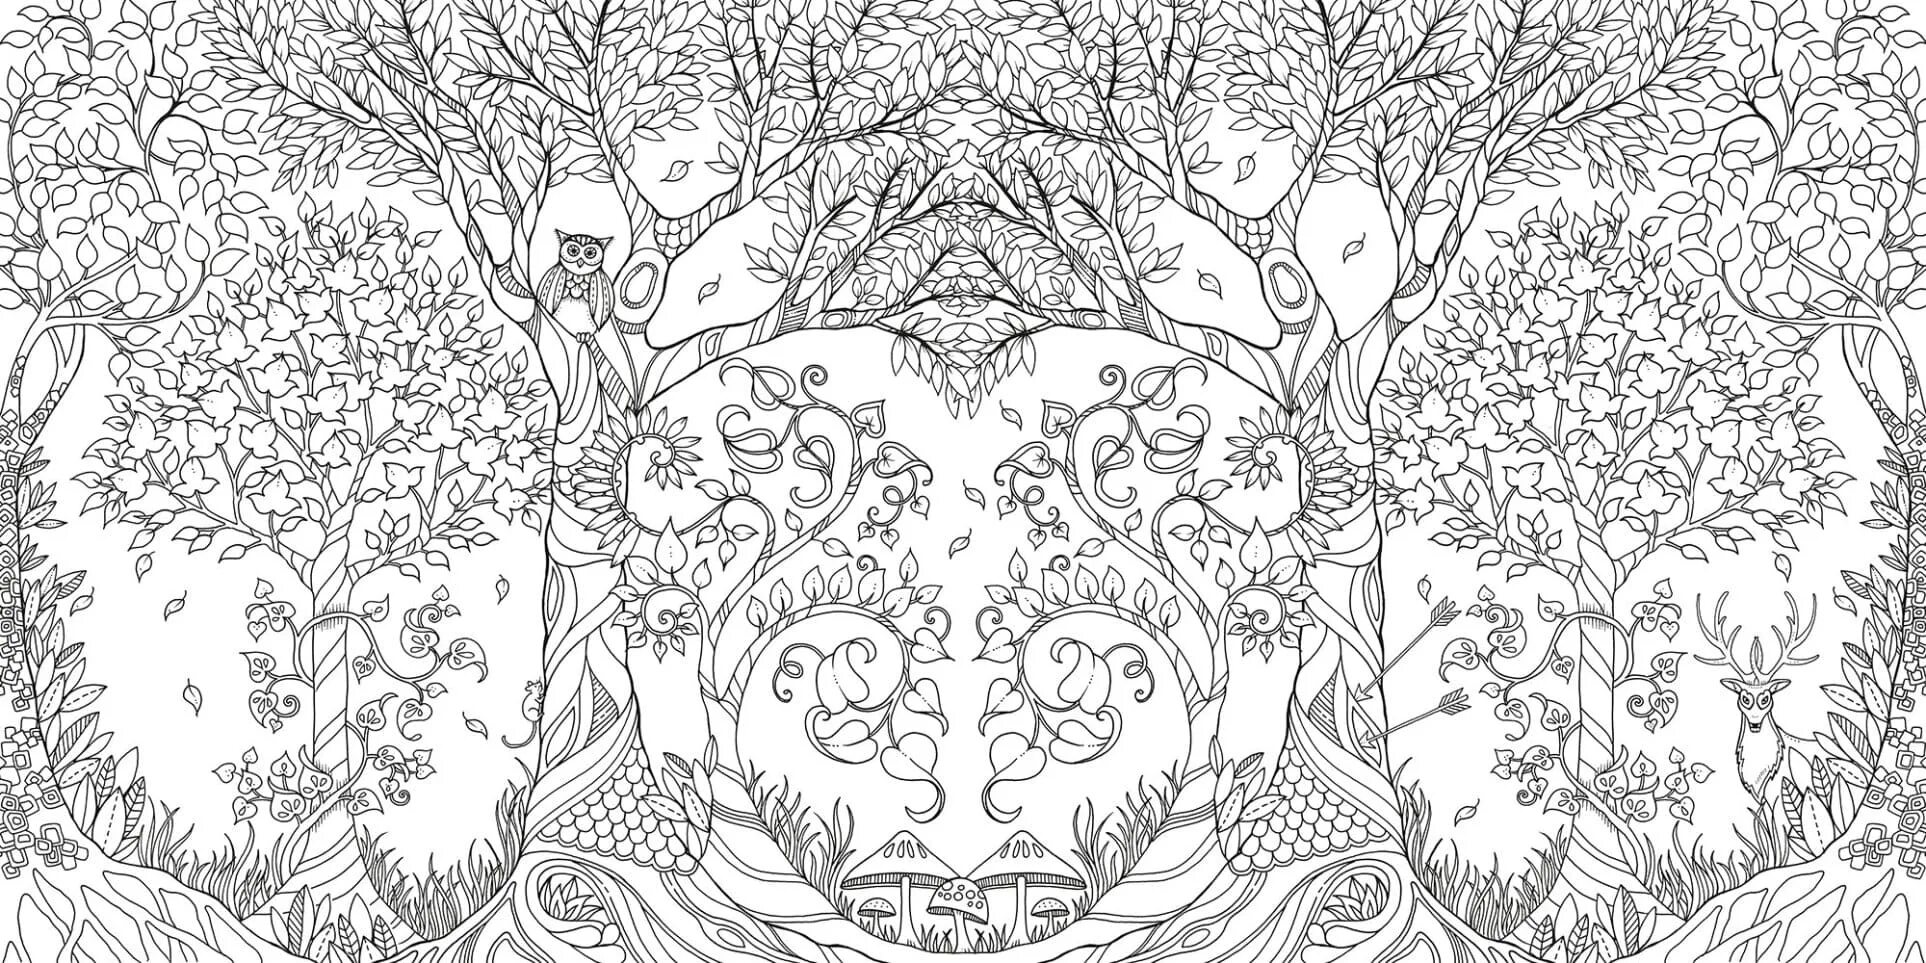 Outstanding complex coloring page